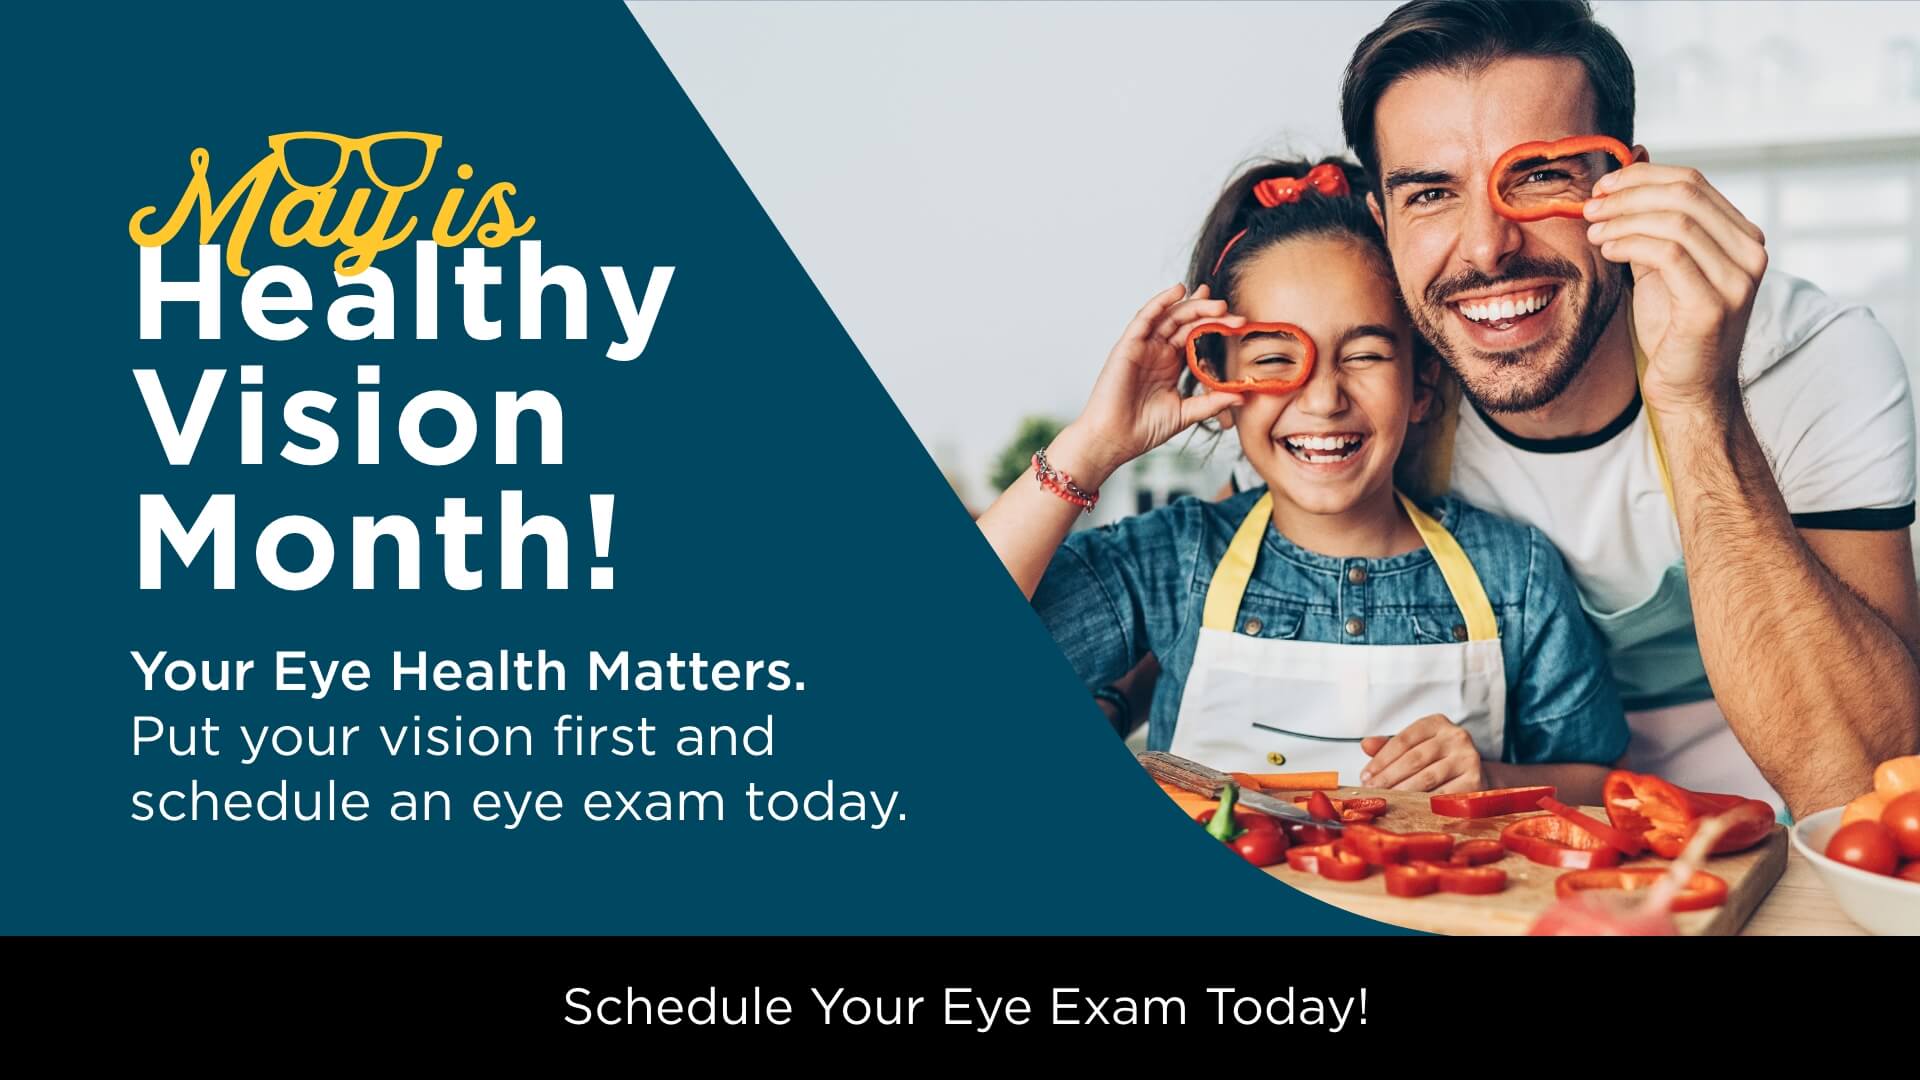 Celebrate Healthy Vision Month